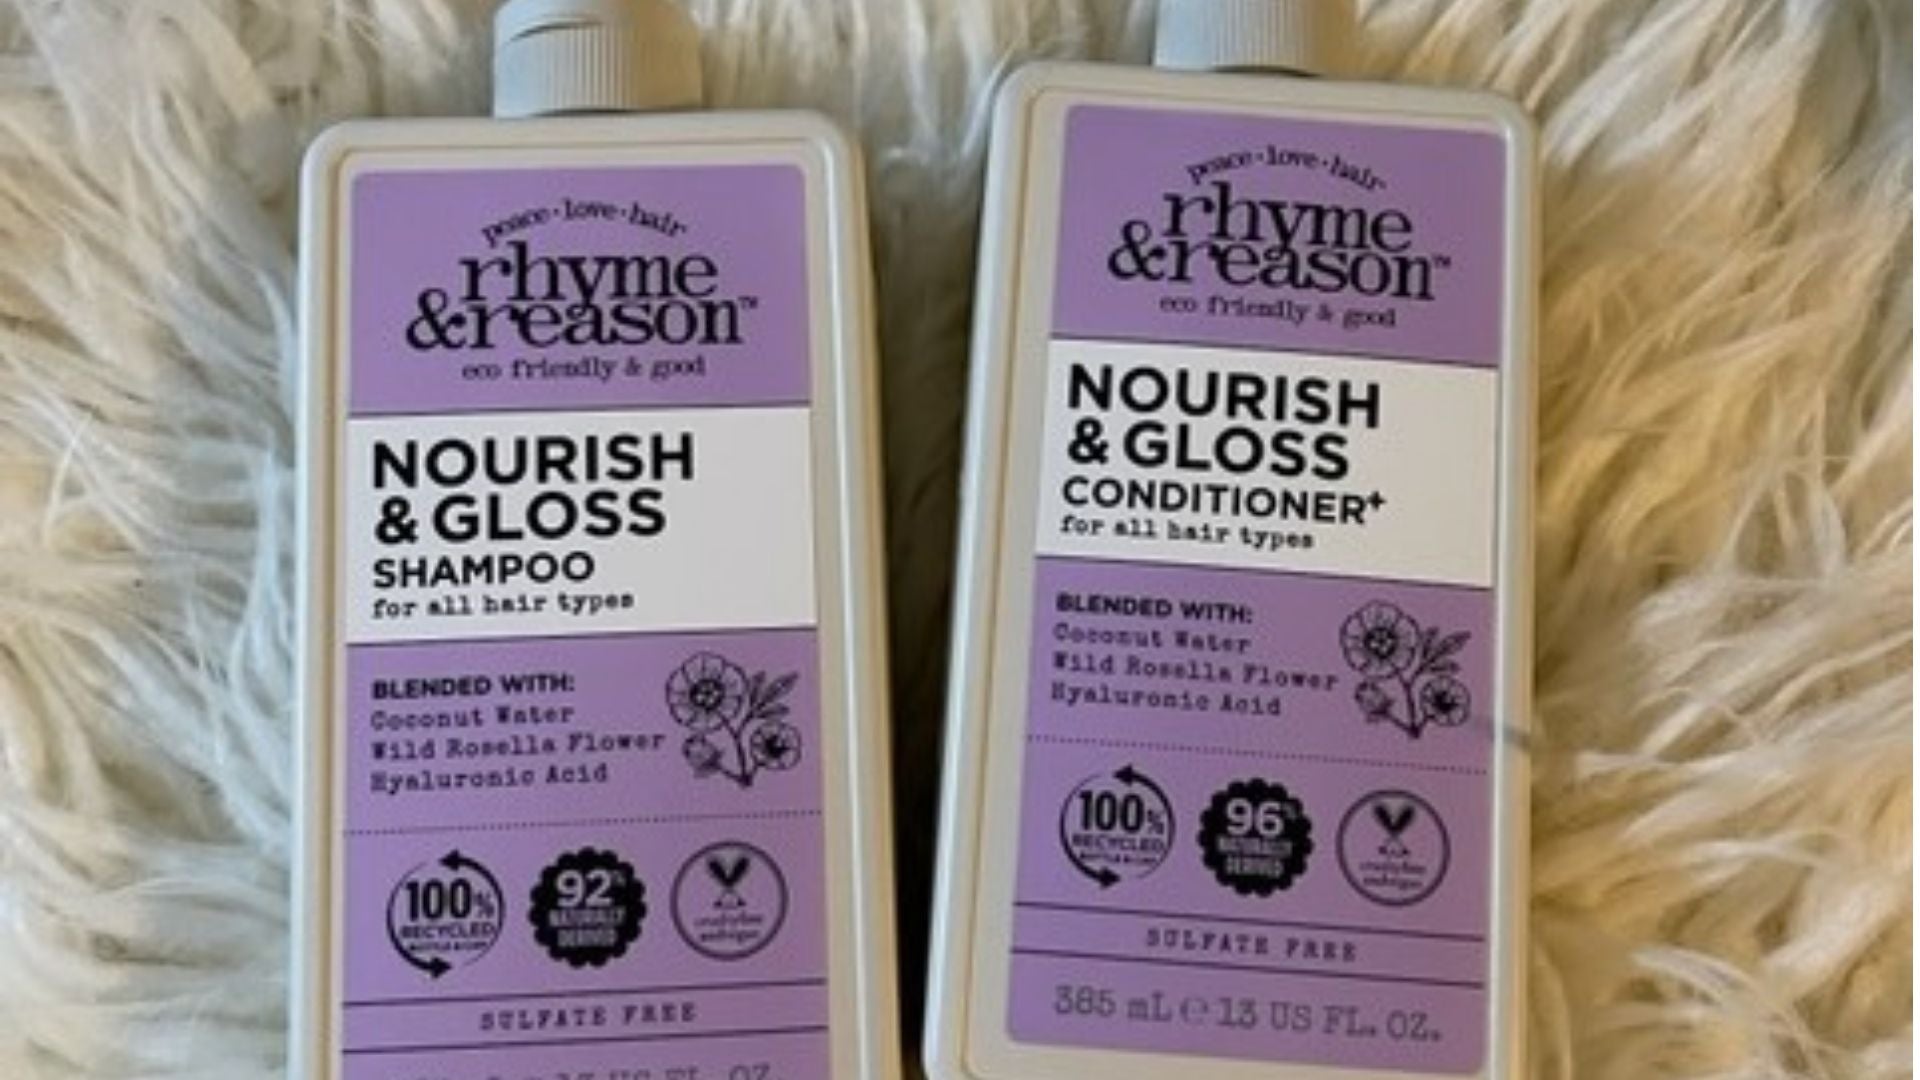 review, photos, ingredients, trends, hair care, 2022, 2023, rhyme & reason, nourish & gloss, shampoo, conditioner, eco friendly hair care, vegan, cruelty free, recycled bottles and caps, dermatologist approved